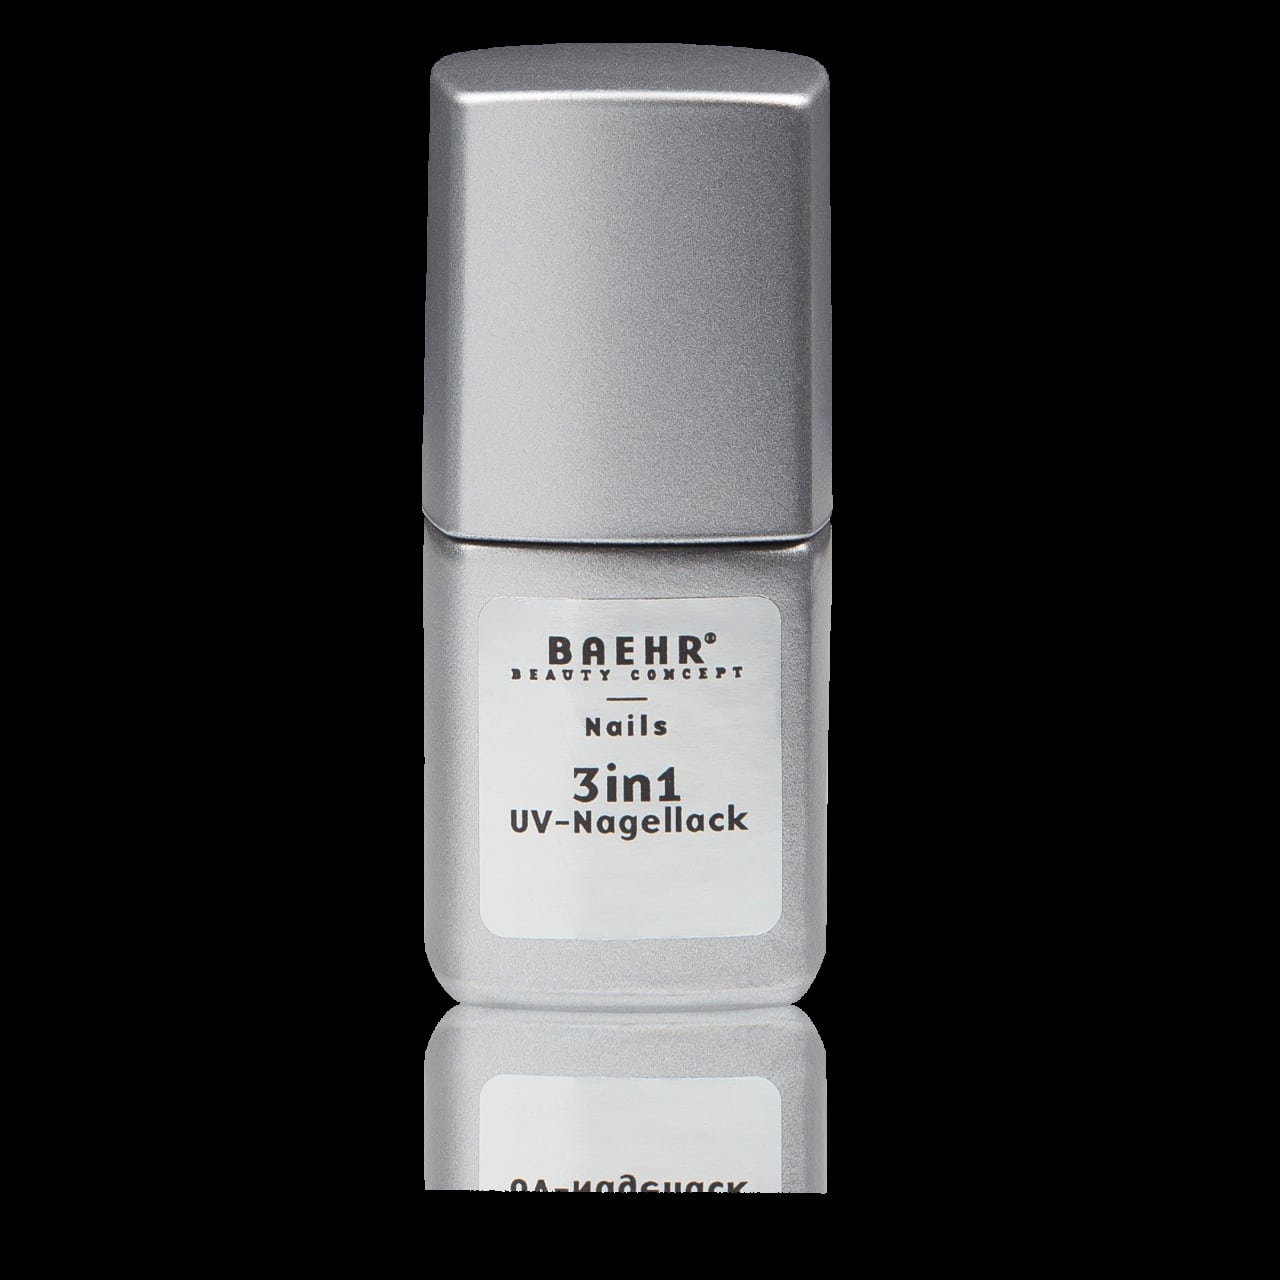 beahr-beauty-concept-3in1-uv-nagellack-living-coral-12-ml